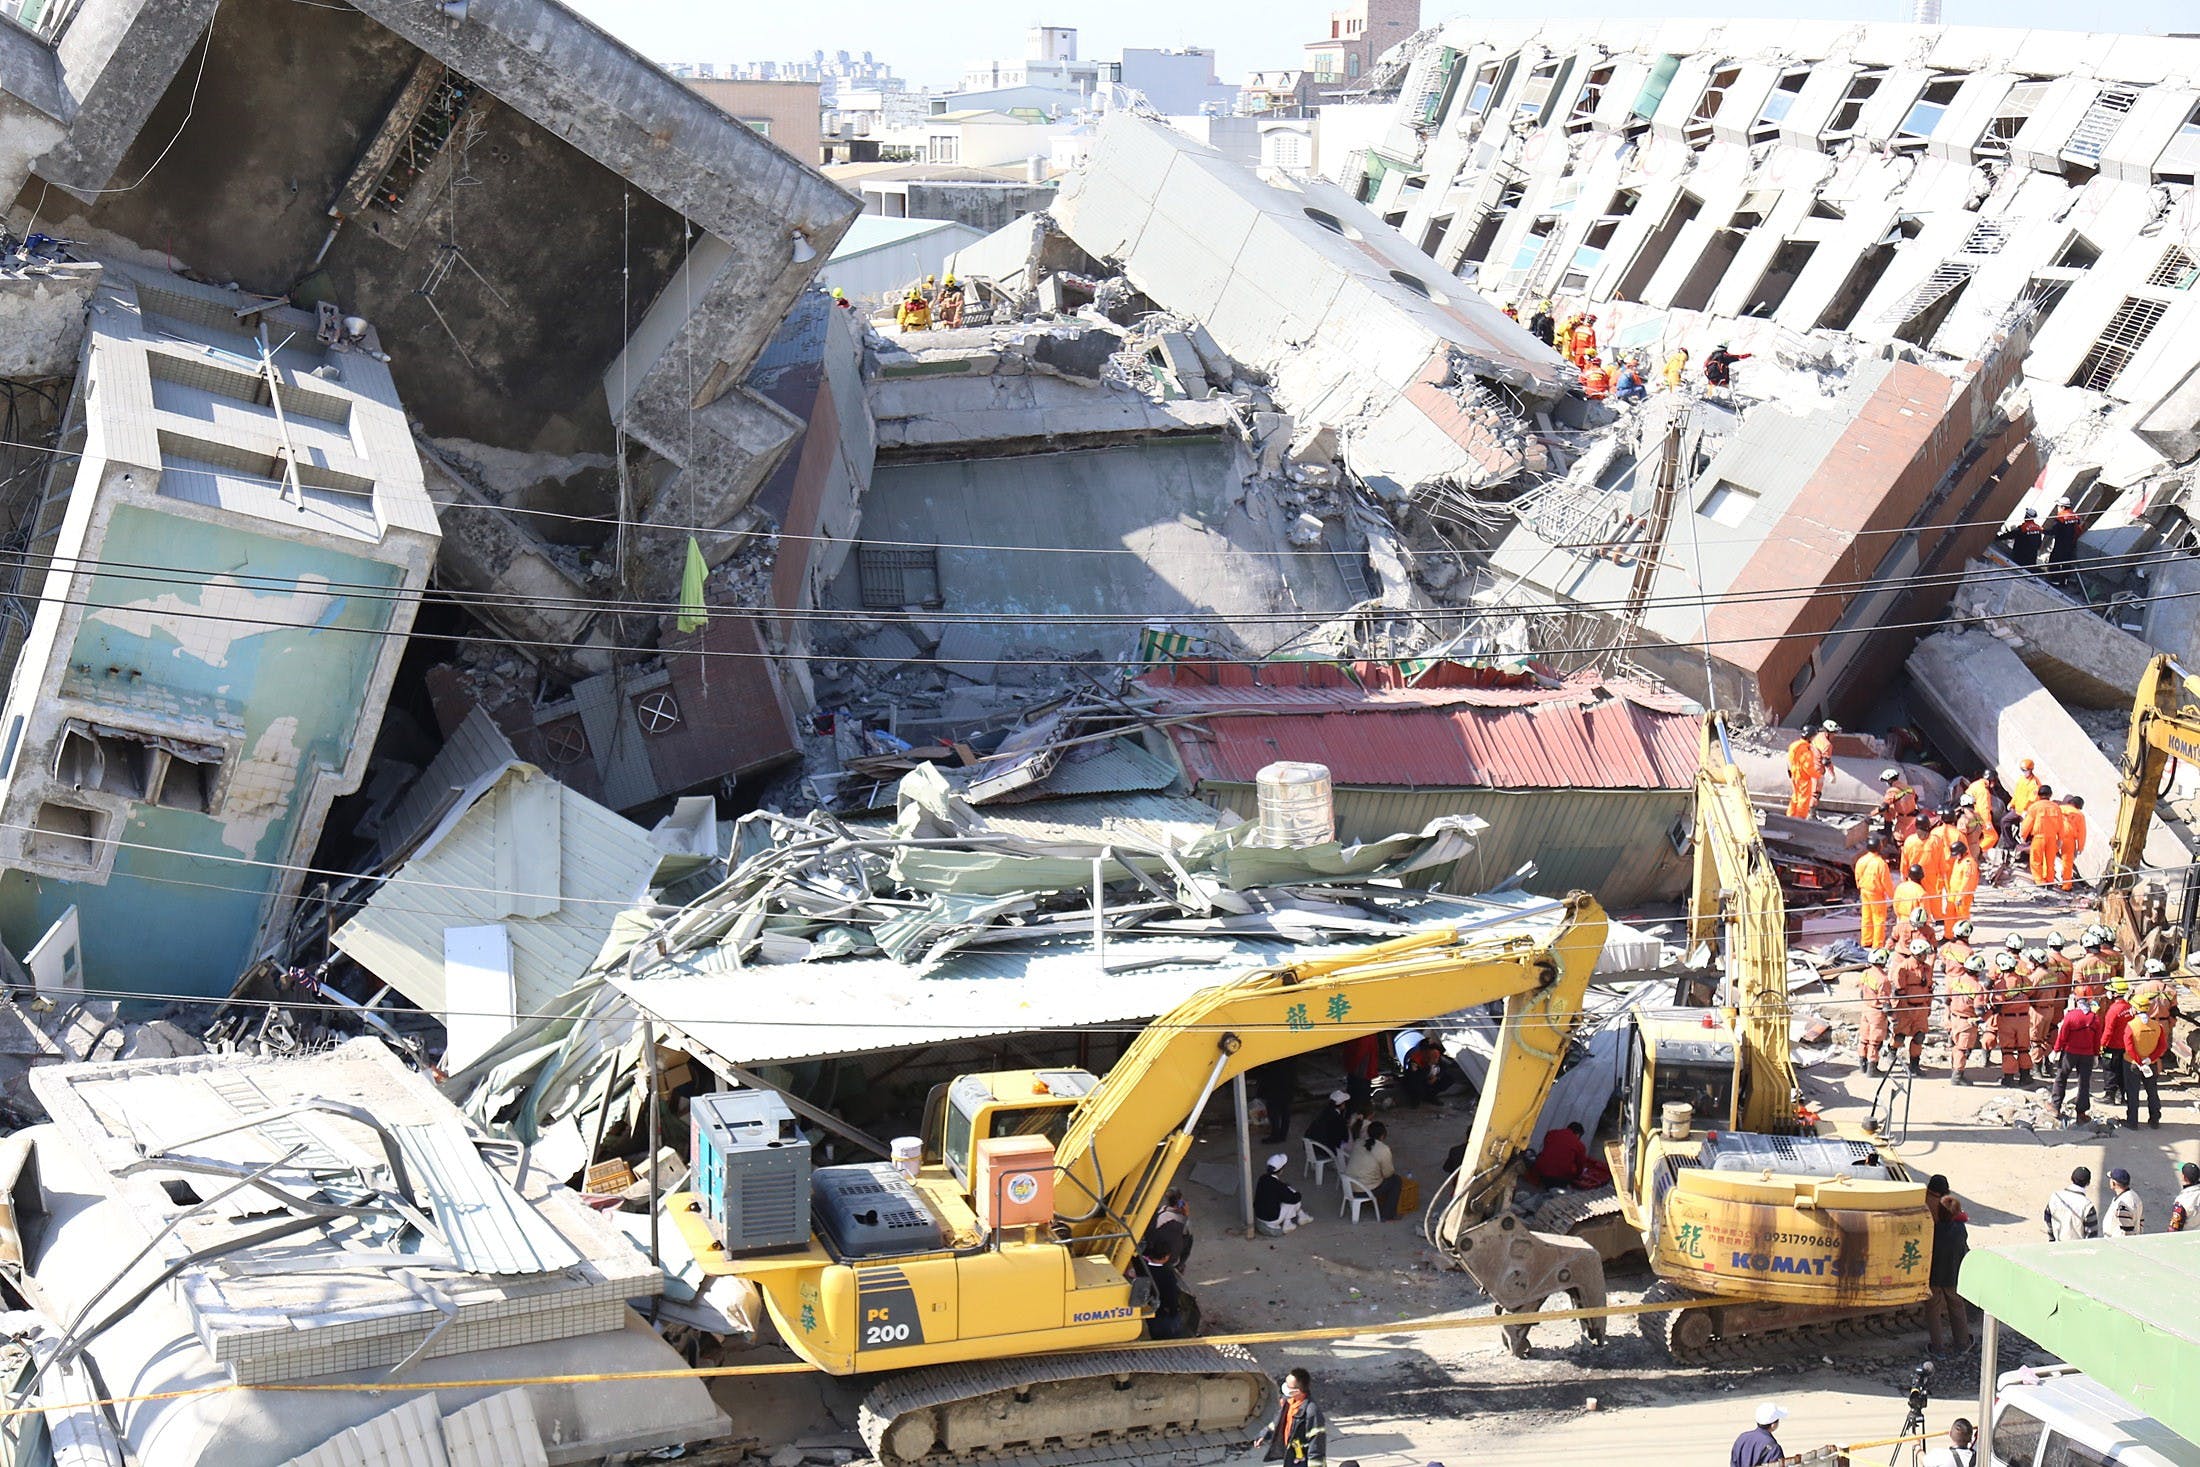 Rescue crews search through the rubble of the toppled Wei-guan Golden Dragon complex in Yongkang District of Tainan City. Photo Credit: Tony Coolidge